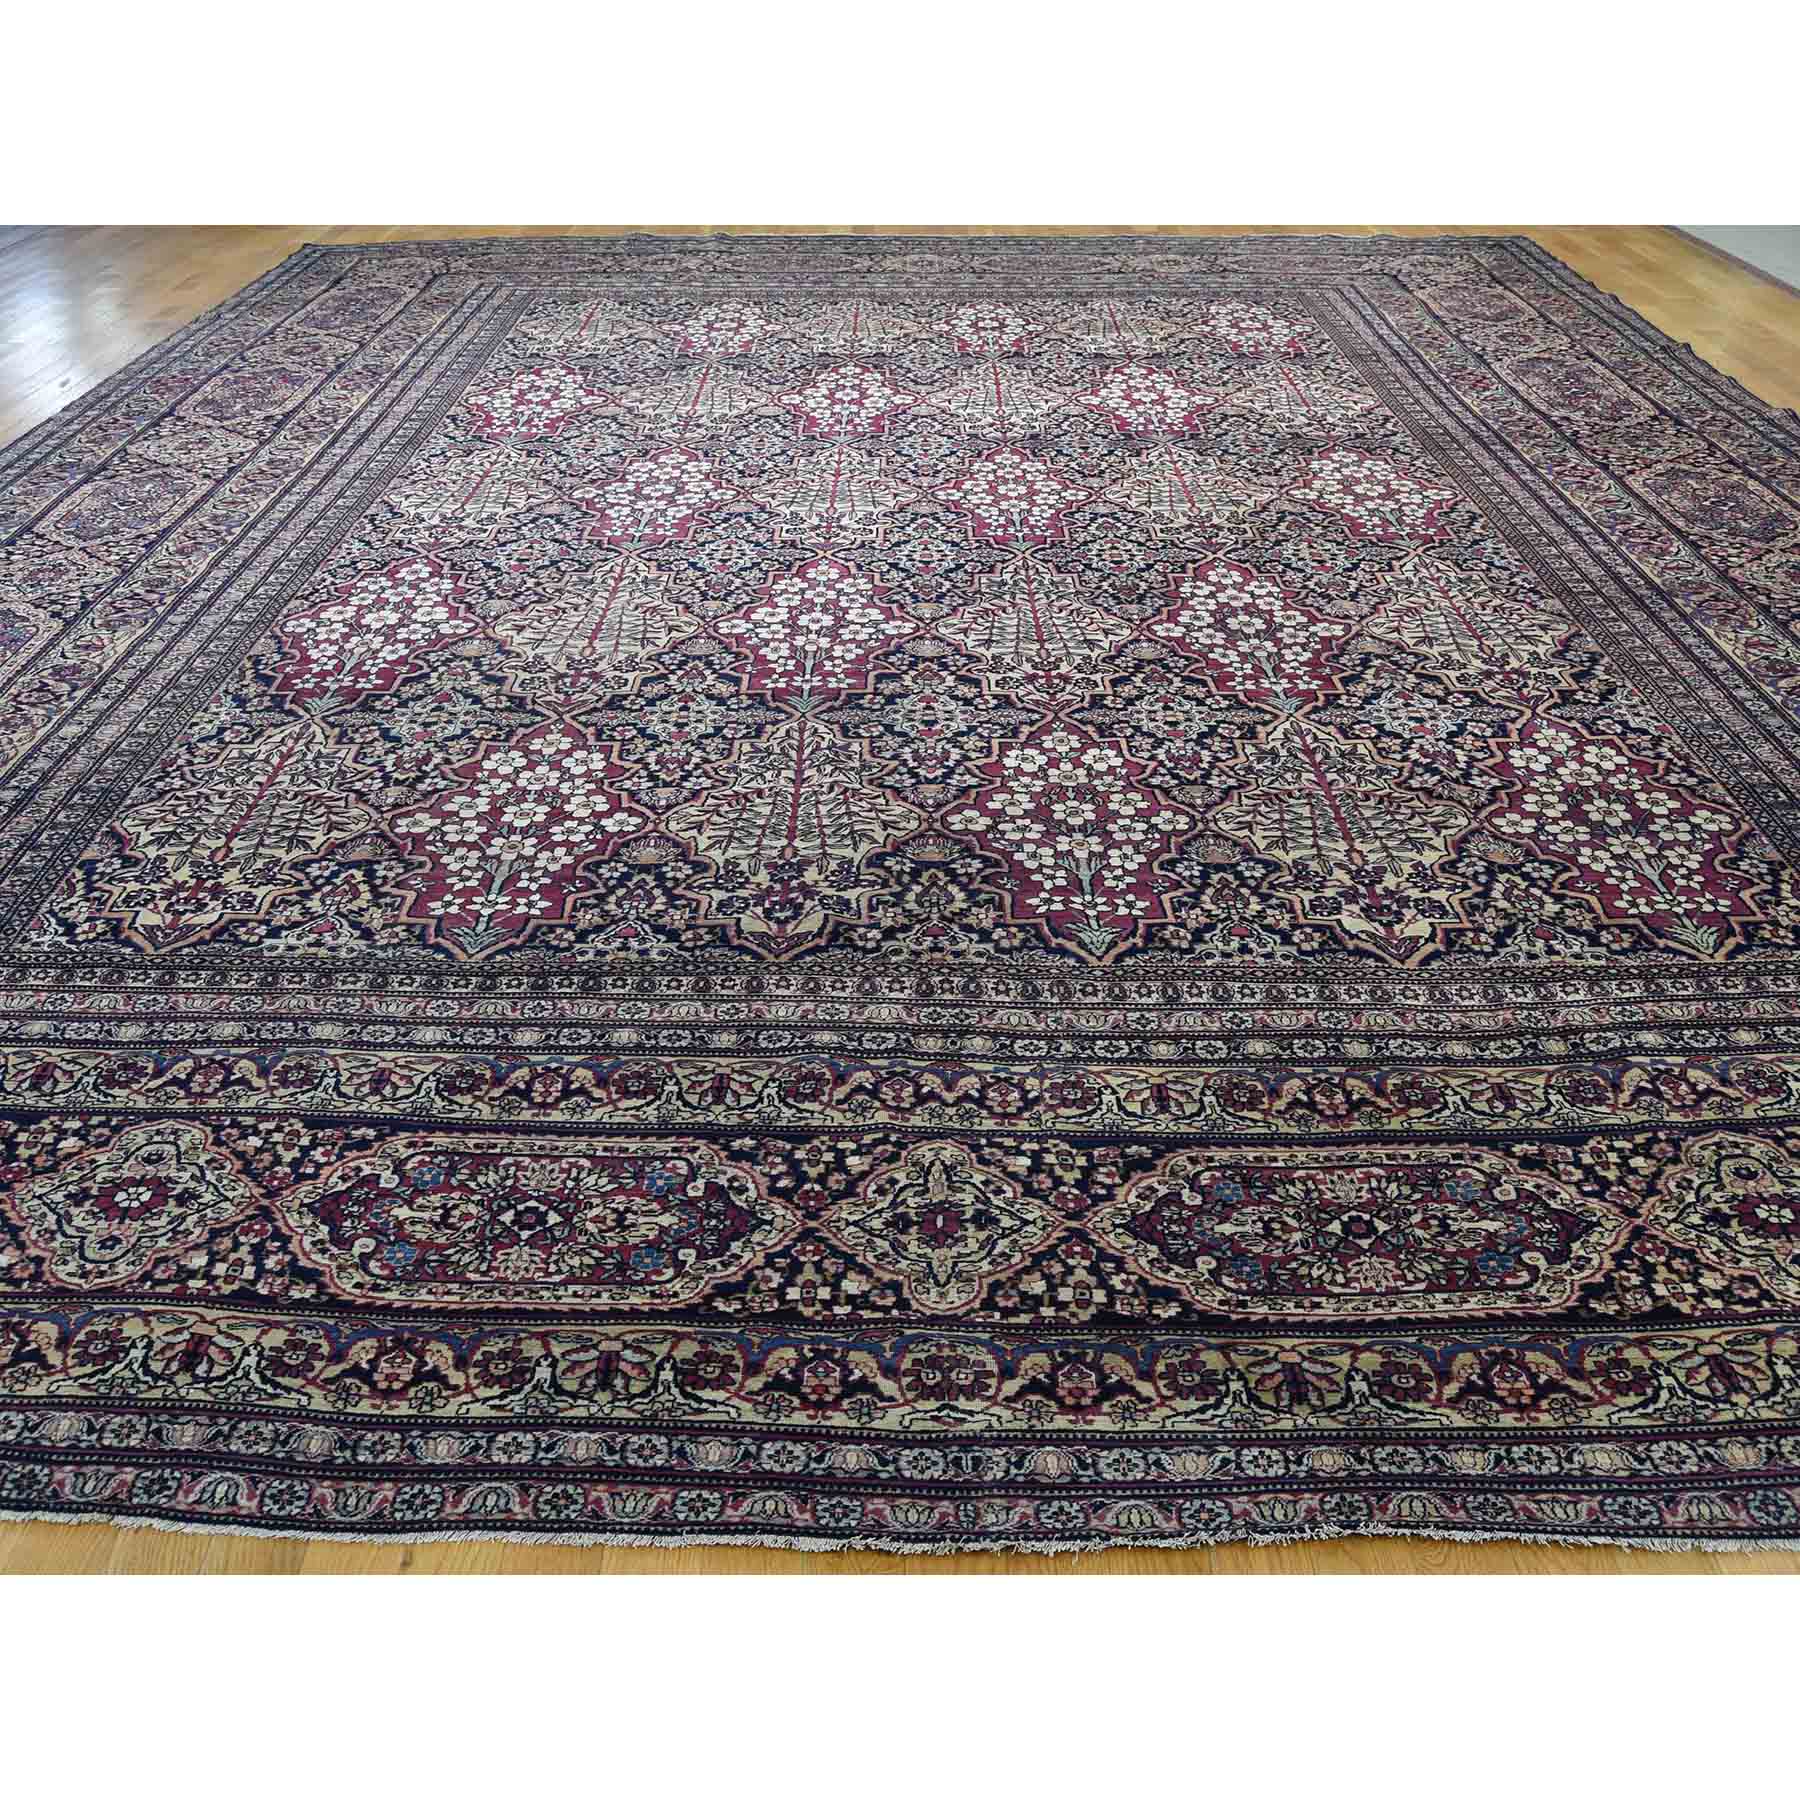 14-x16-9  Antique Persian Kerman Shah Good Condition Even Wear Hand-Knotted Oversize Oriental Rug 